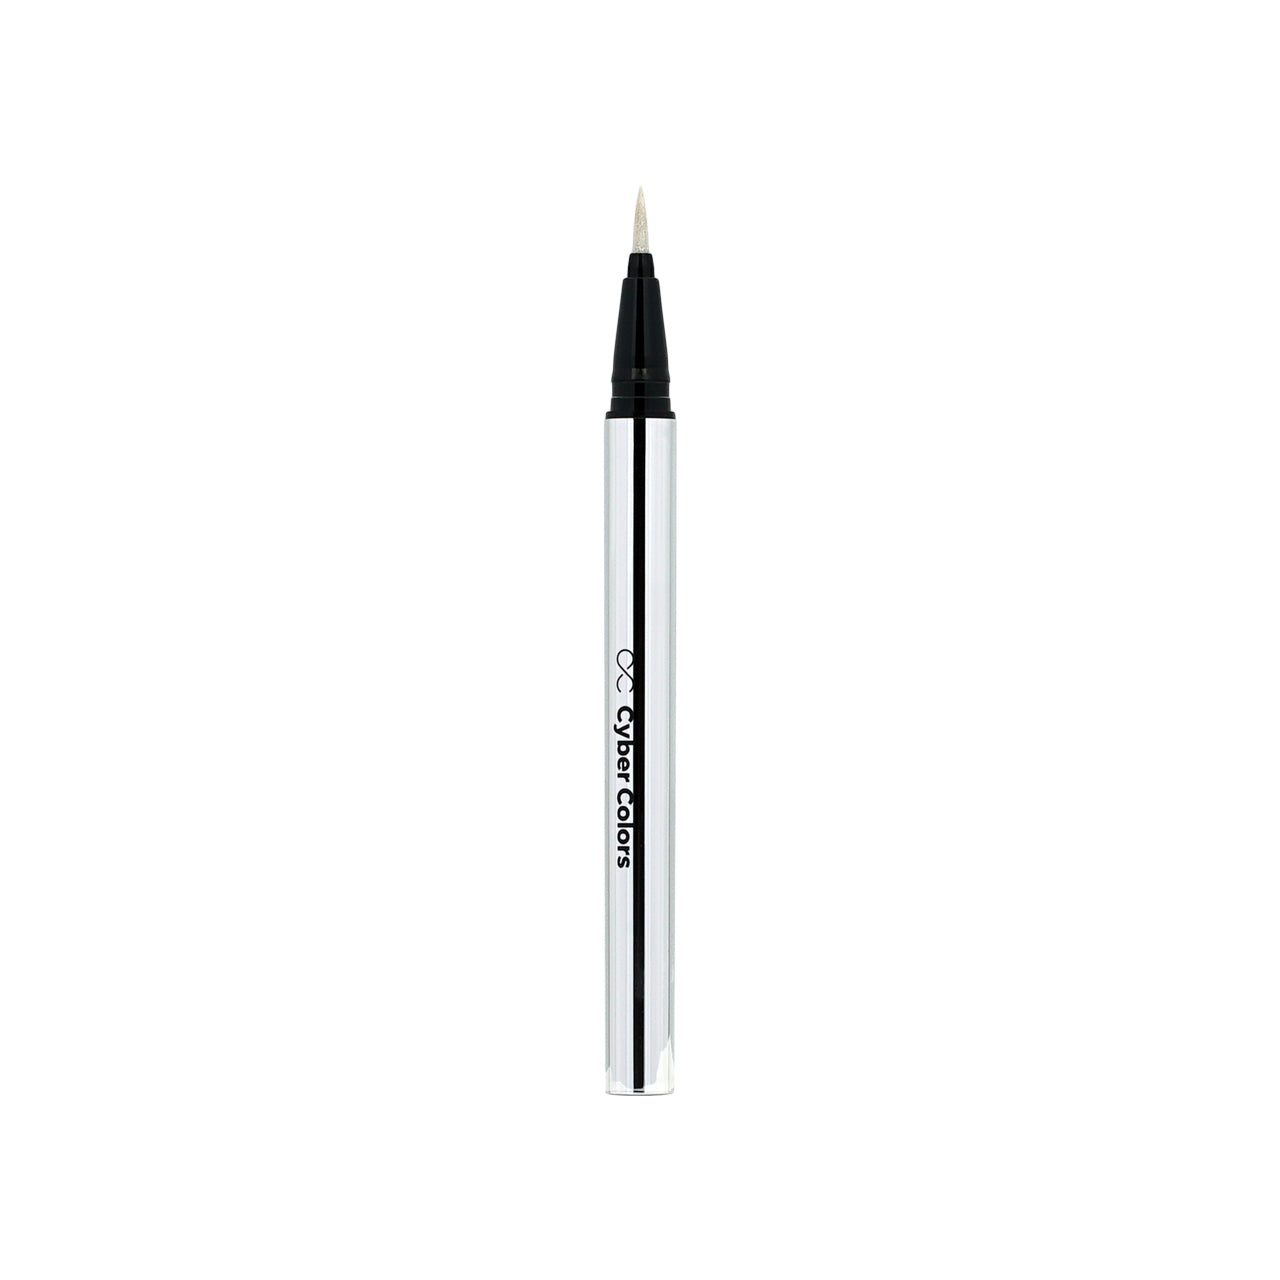 Cyber Colors Bright Eyes Liner #02 Silver Sparkle 0.5g - Sasa Global eShop